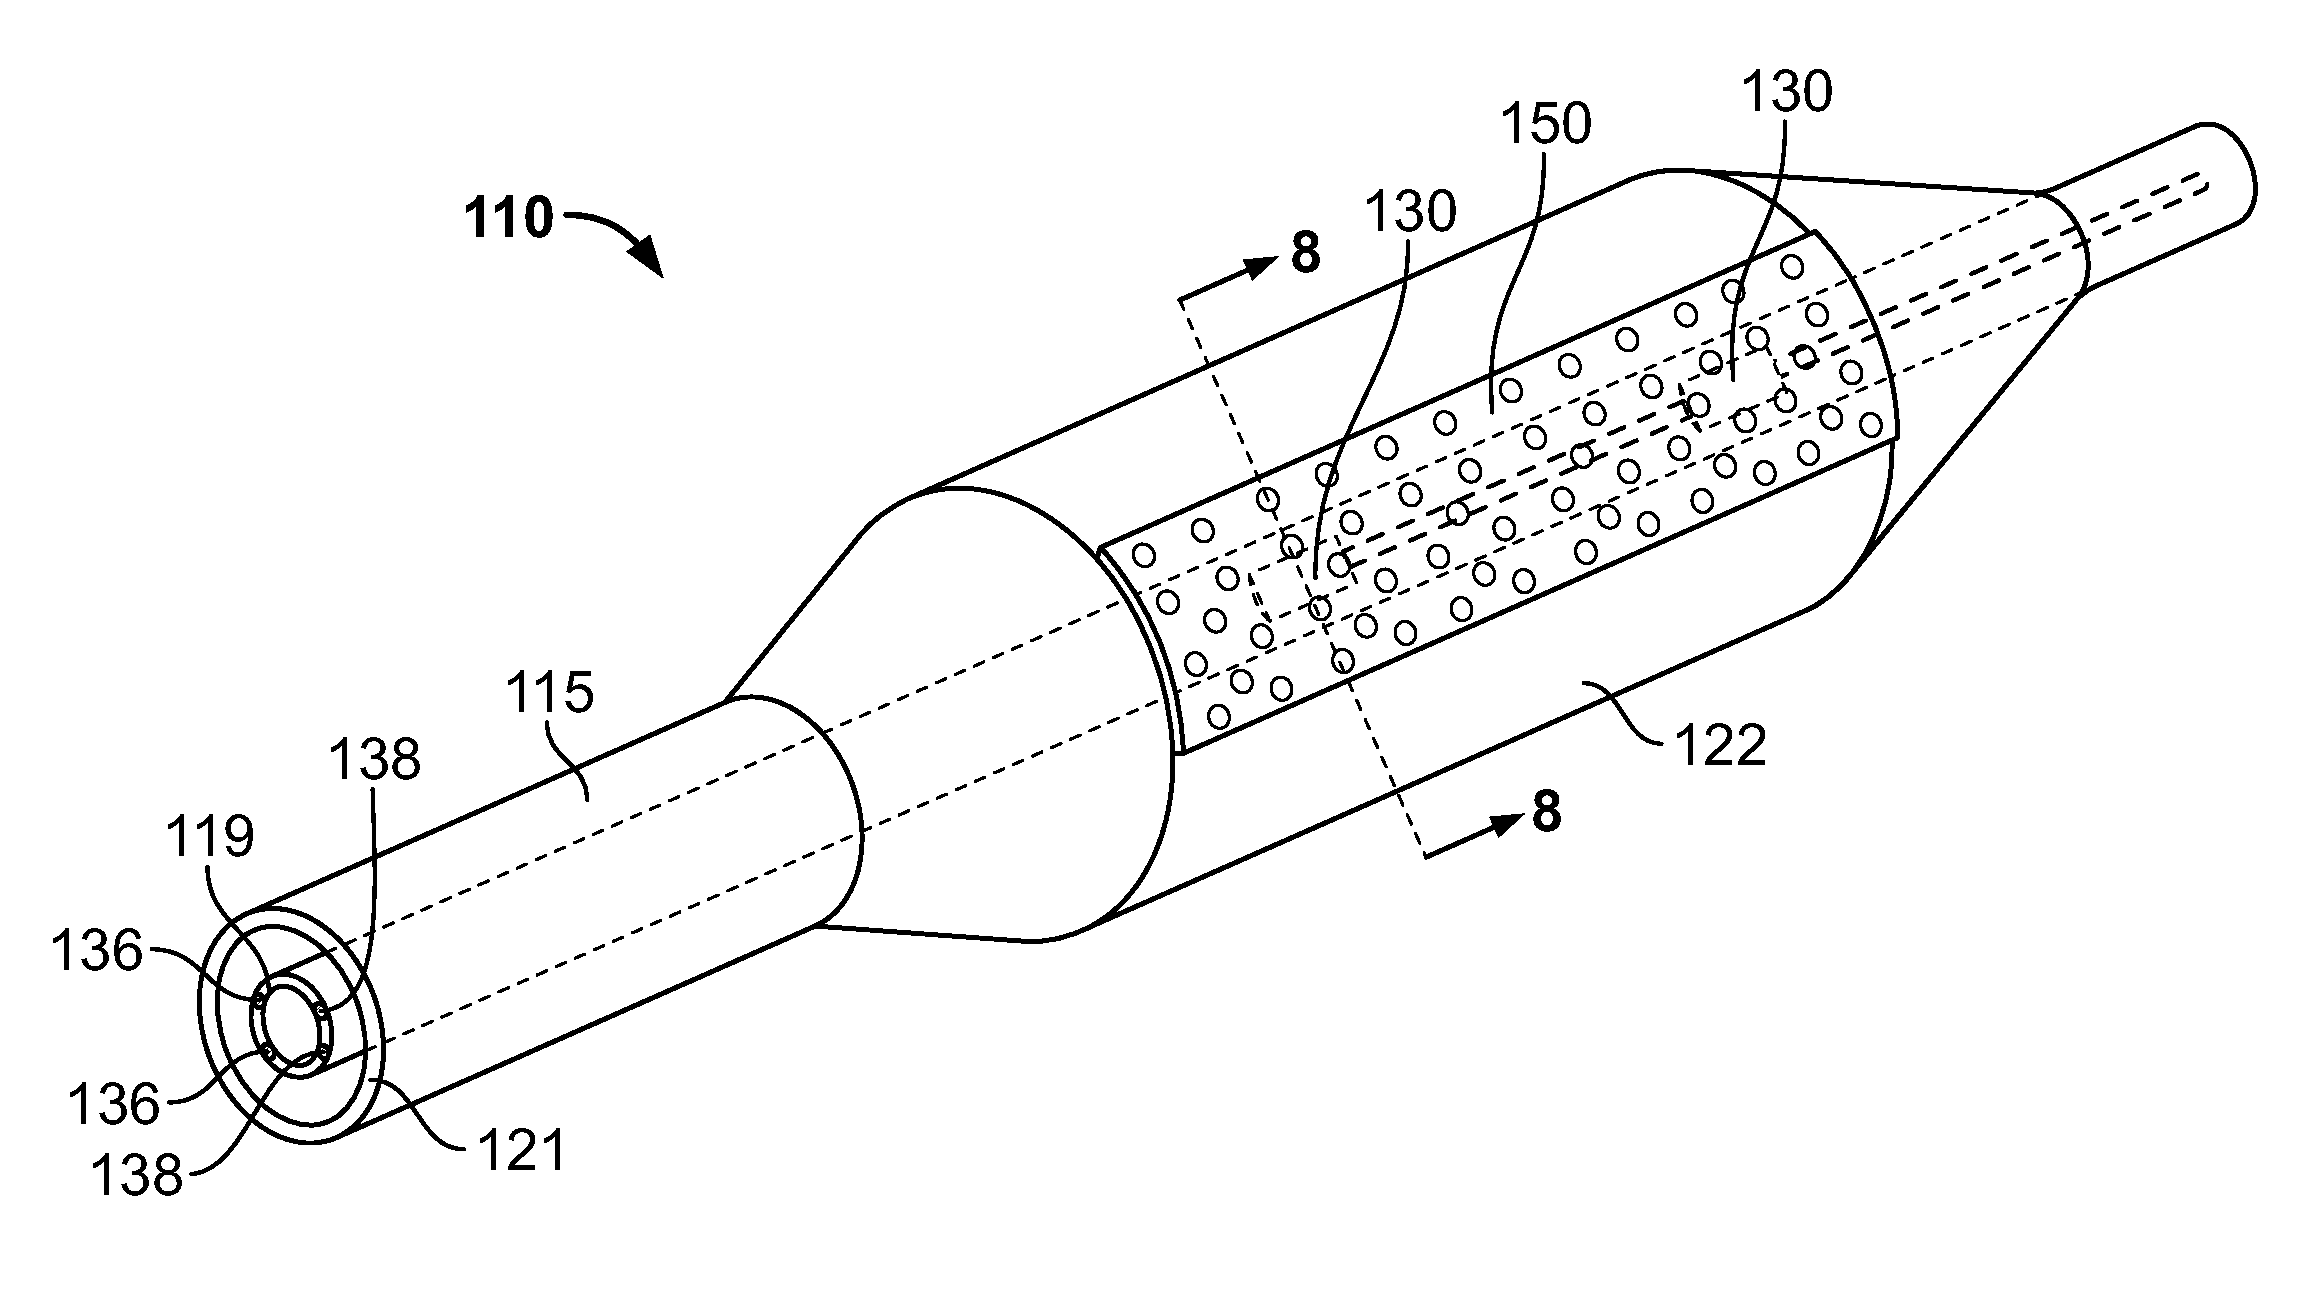 Delivery device for localized delivery of a therapeutic agent